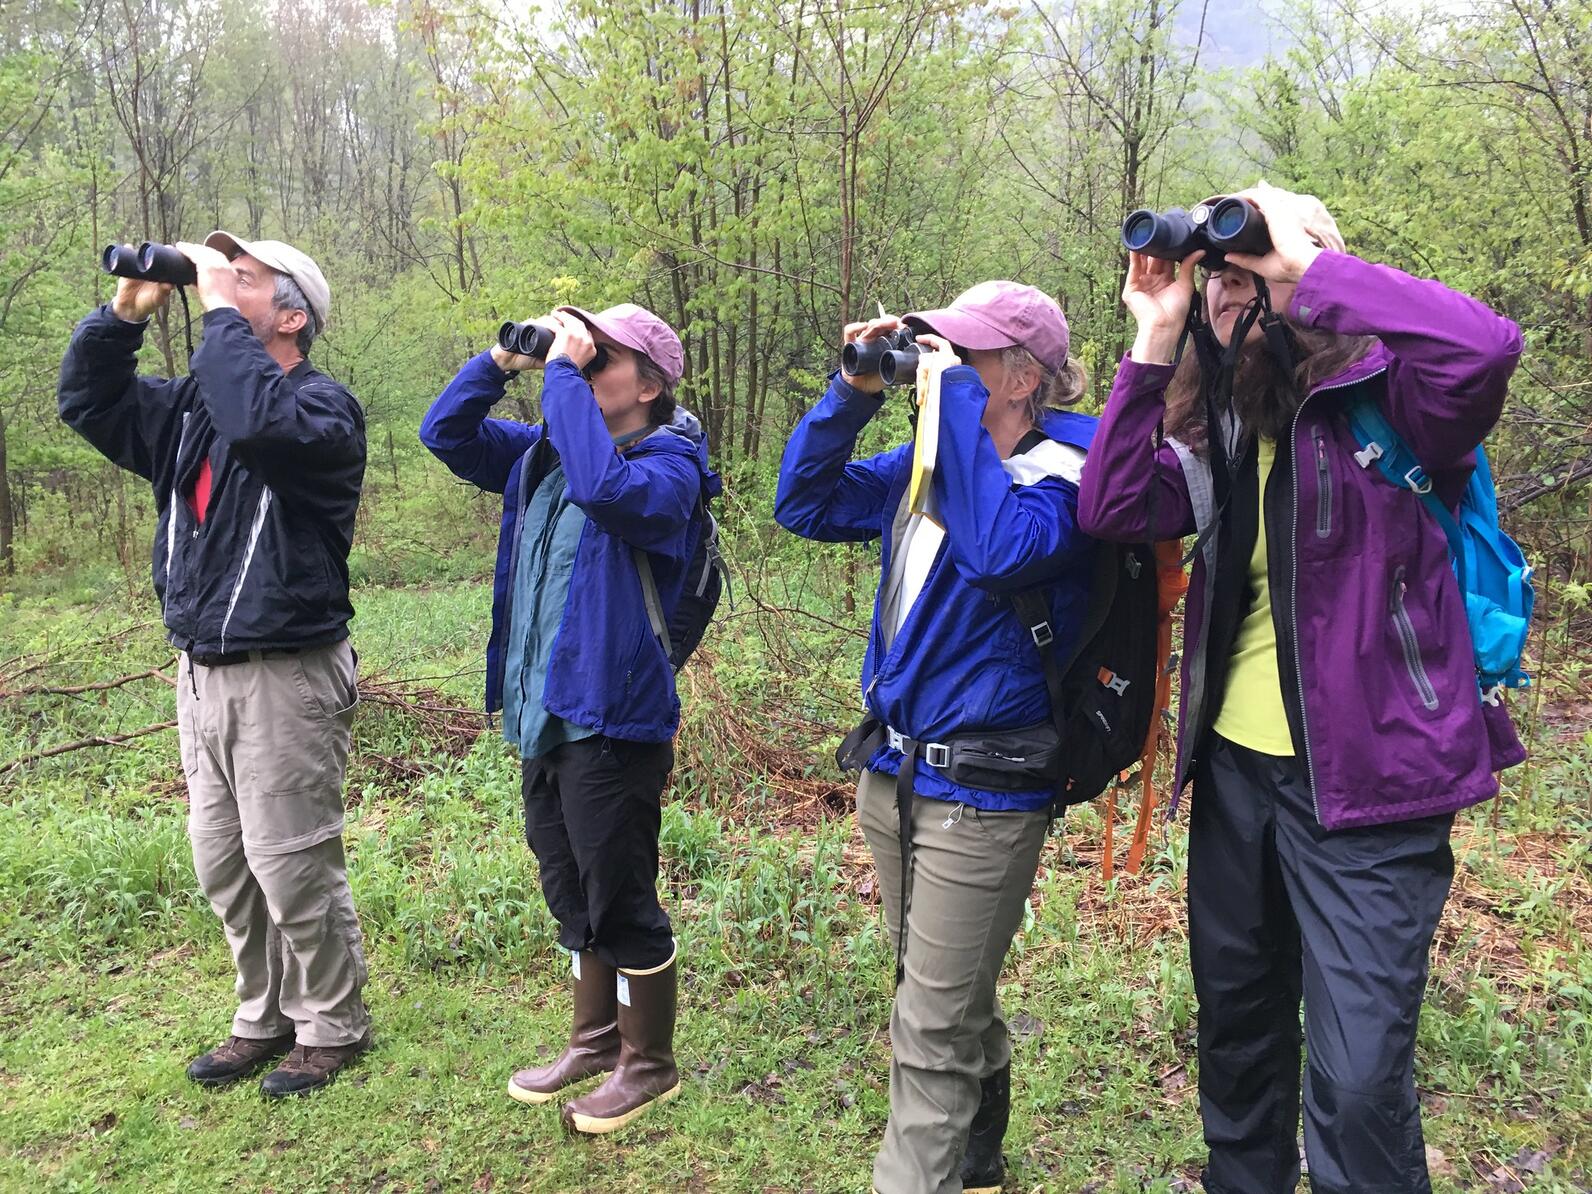 A small group of birders scans the treetops for birds, binoculars held to their eyes.